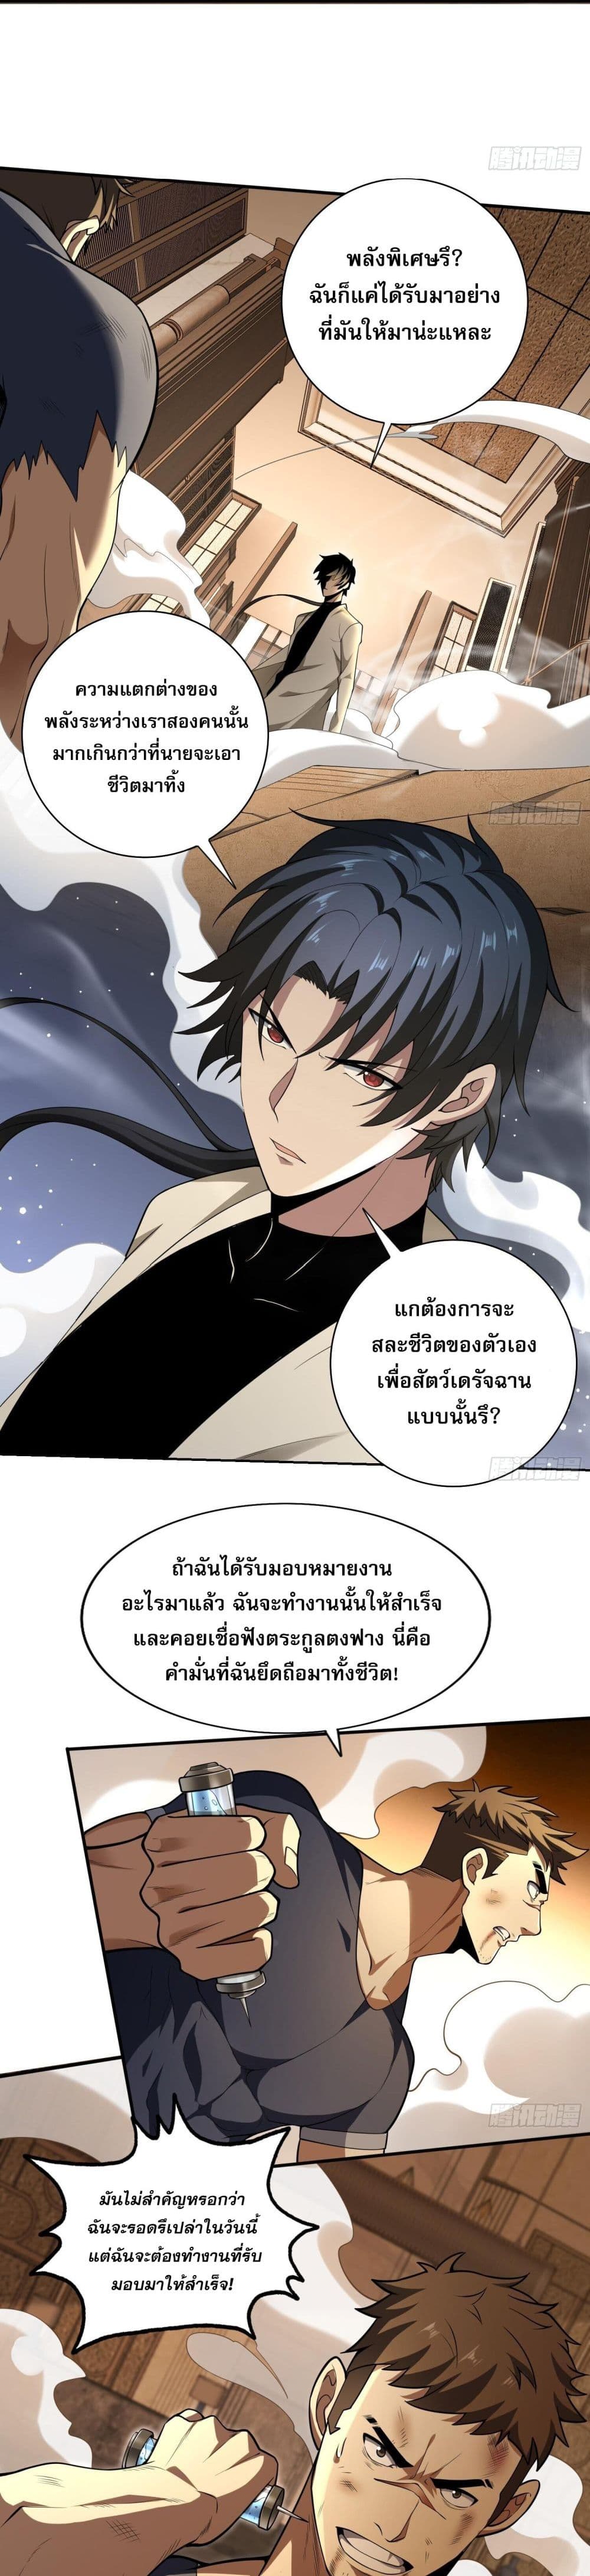 The All-Knowing Cultivator ผู้ฝึกตนผู้รอบรู้ 10/21